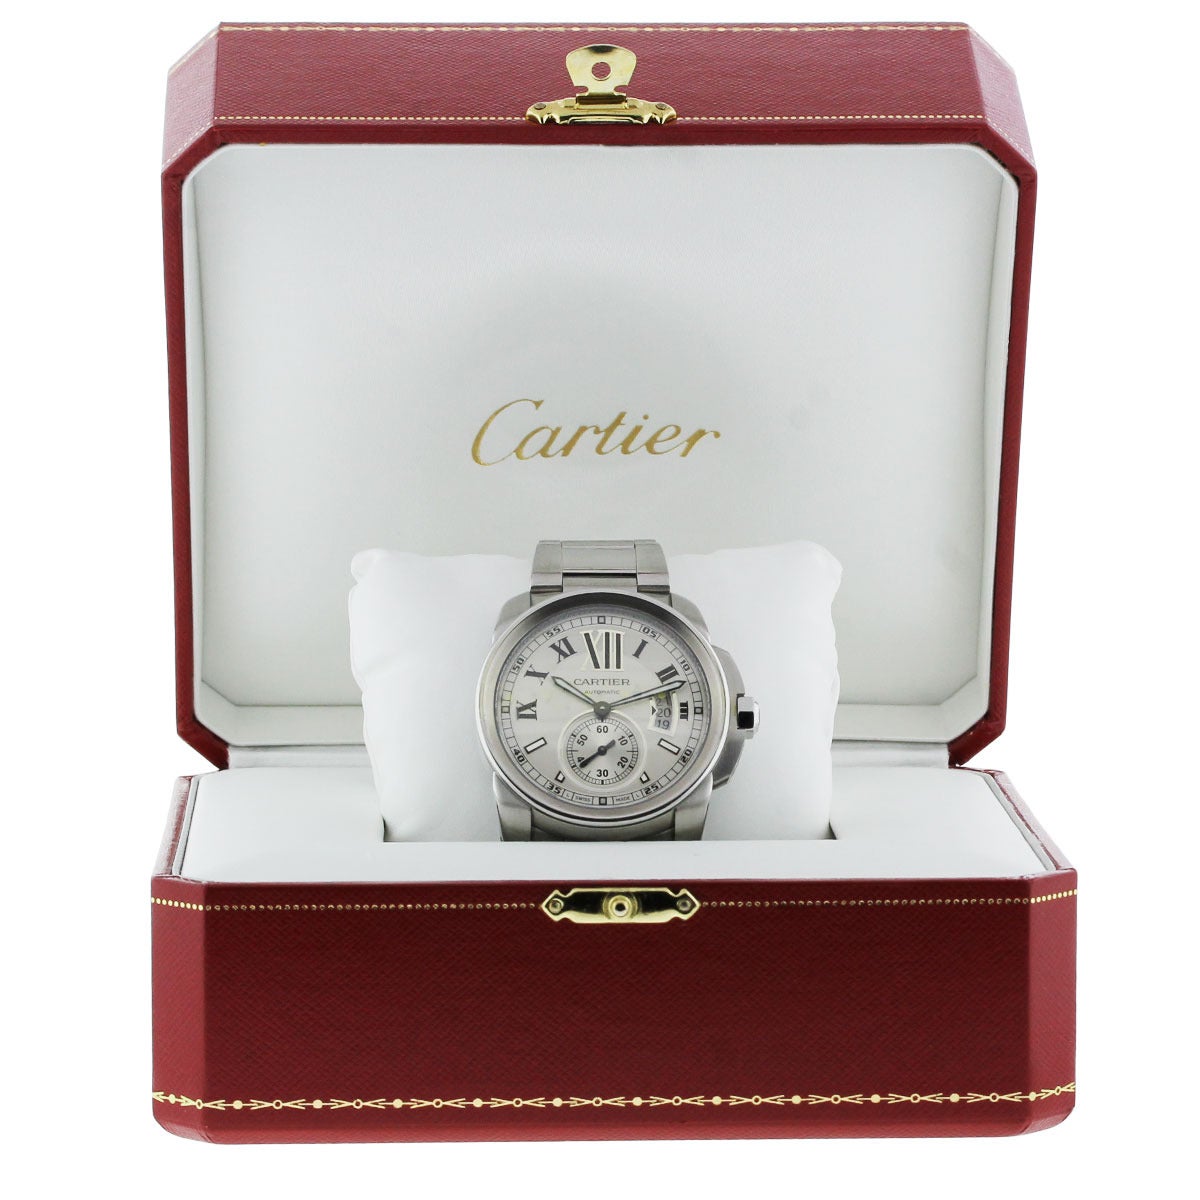 Cartier Stainless Steel Calibre Chronograph Automatic Wristwatch Ref 3389 2